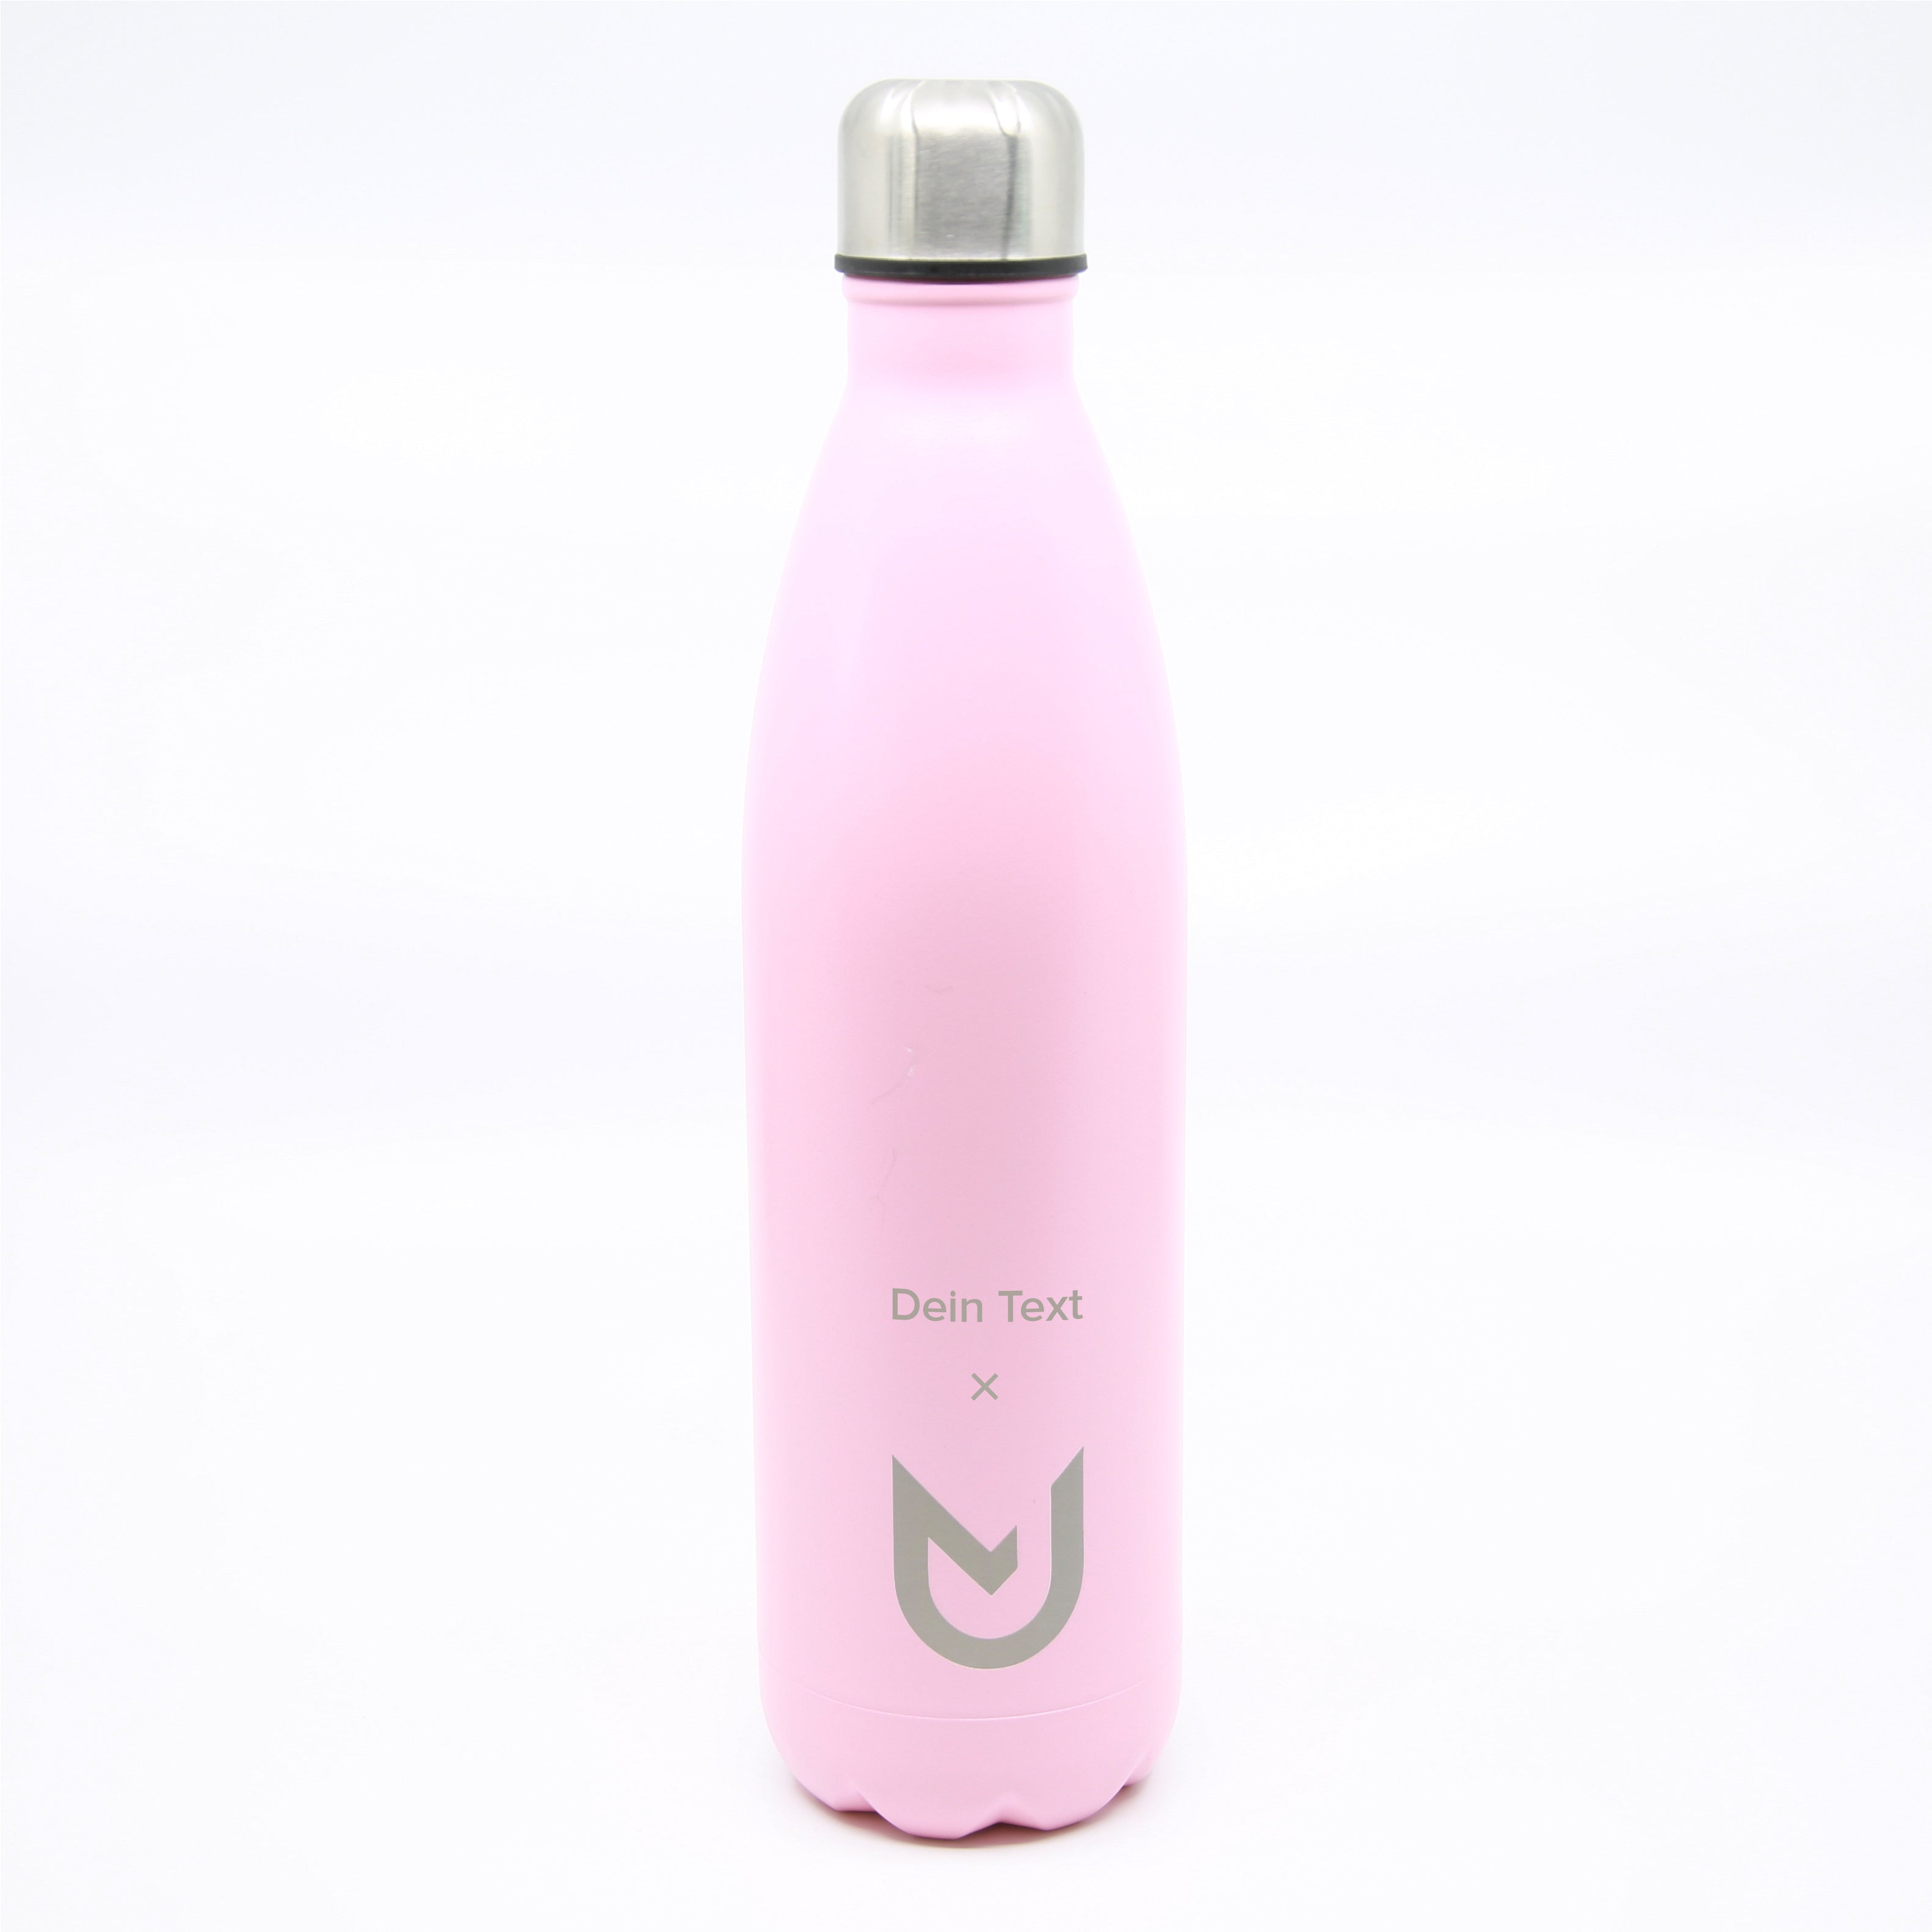 Drinking bottle personalized text on the front (9 characters)